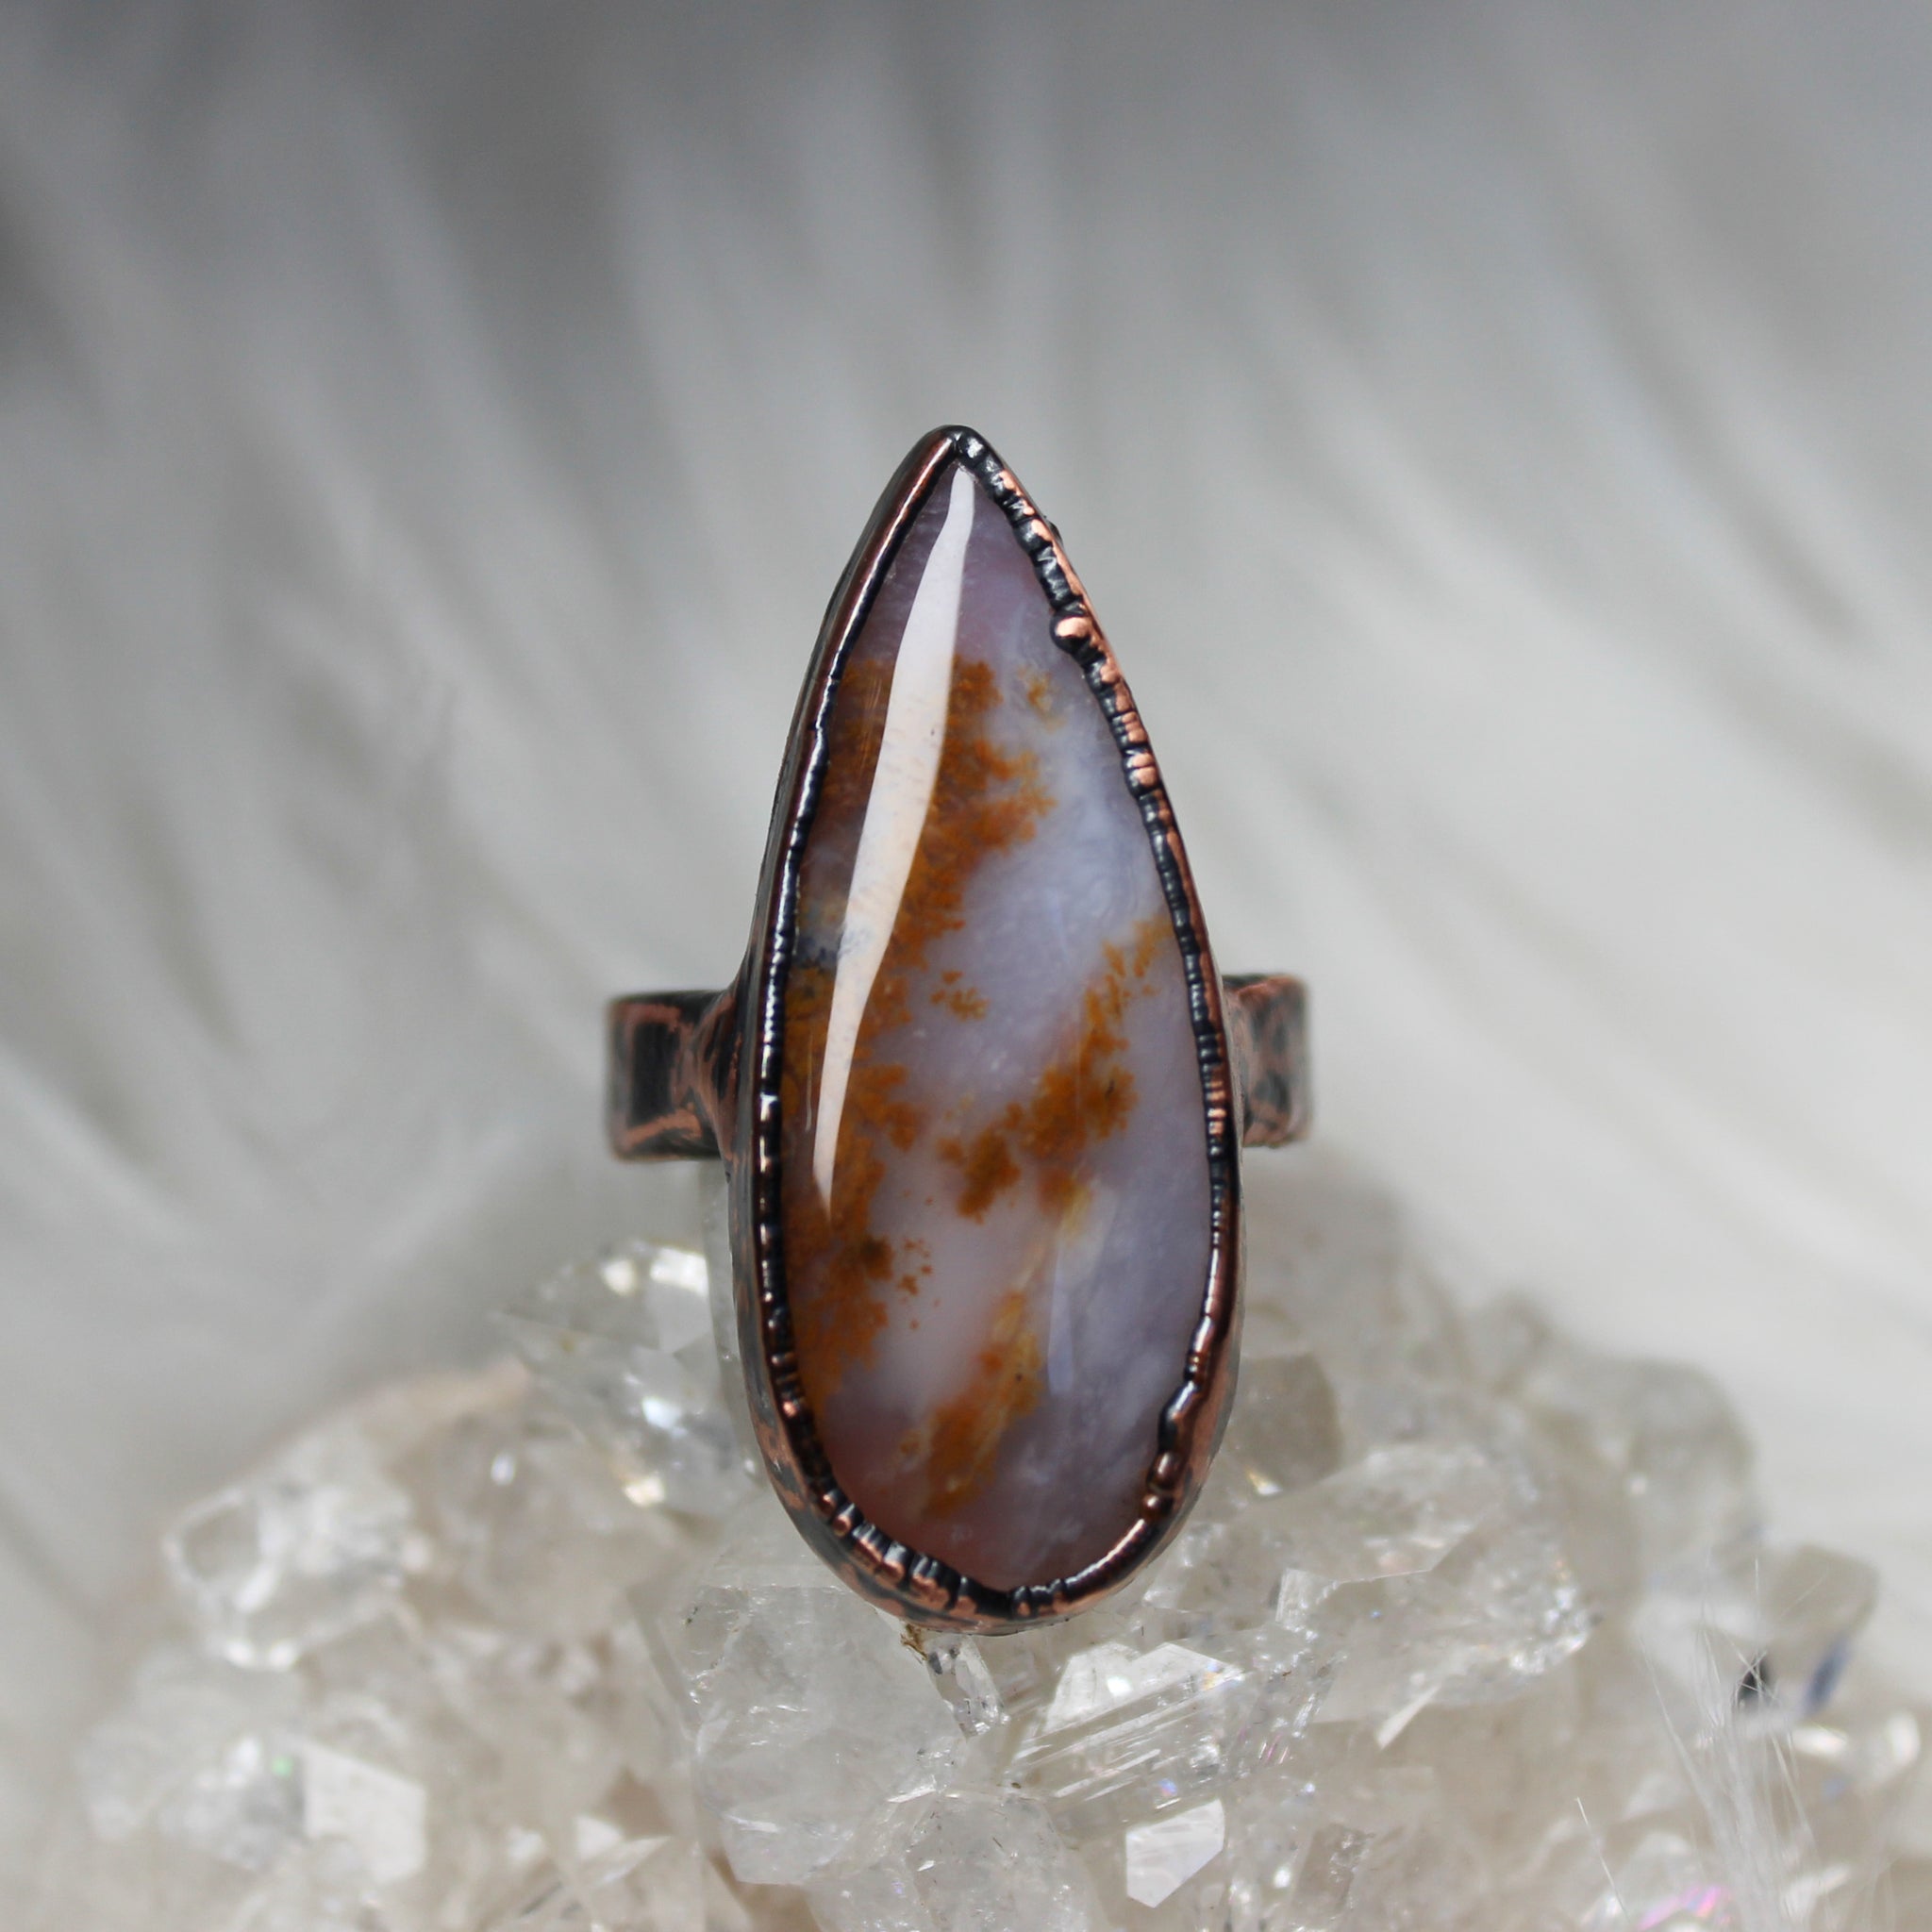 Siberian Dendritic Agate Ring size 9